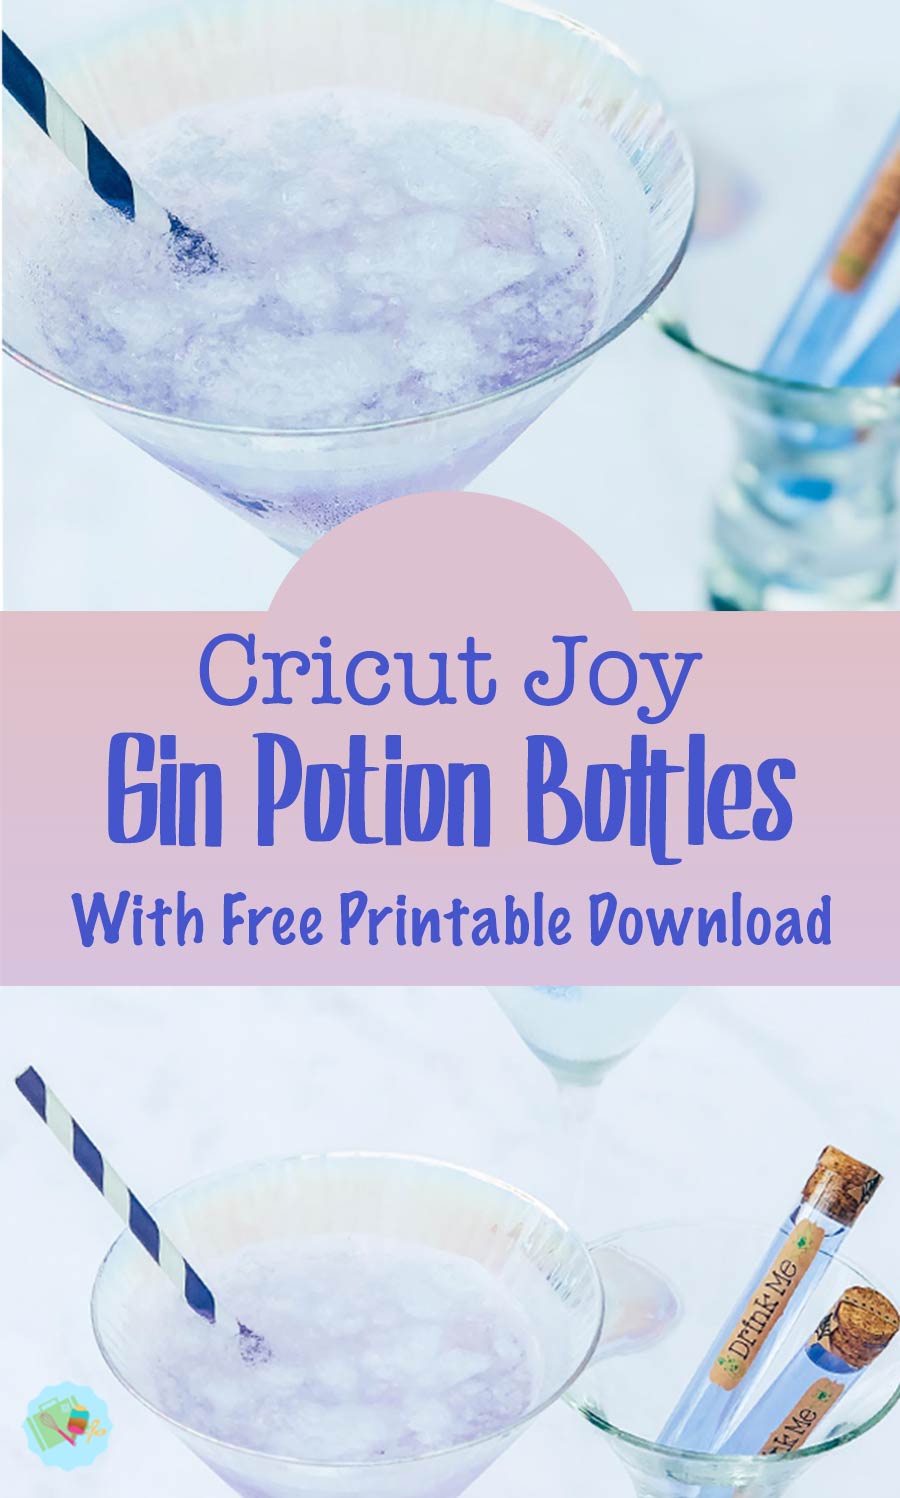 Gin Potion Bottles Made With tHe Cricut Joy and free Printable downloads_